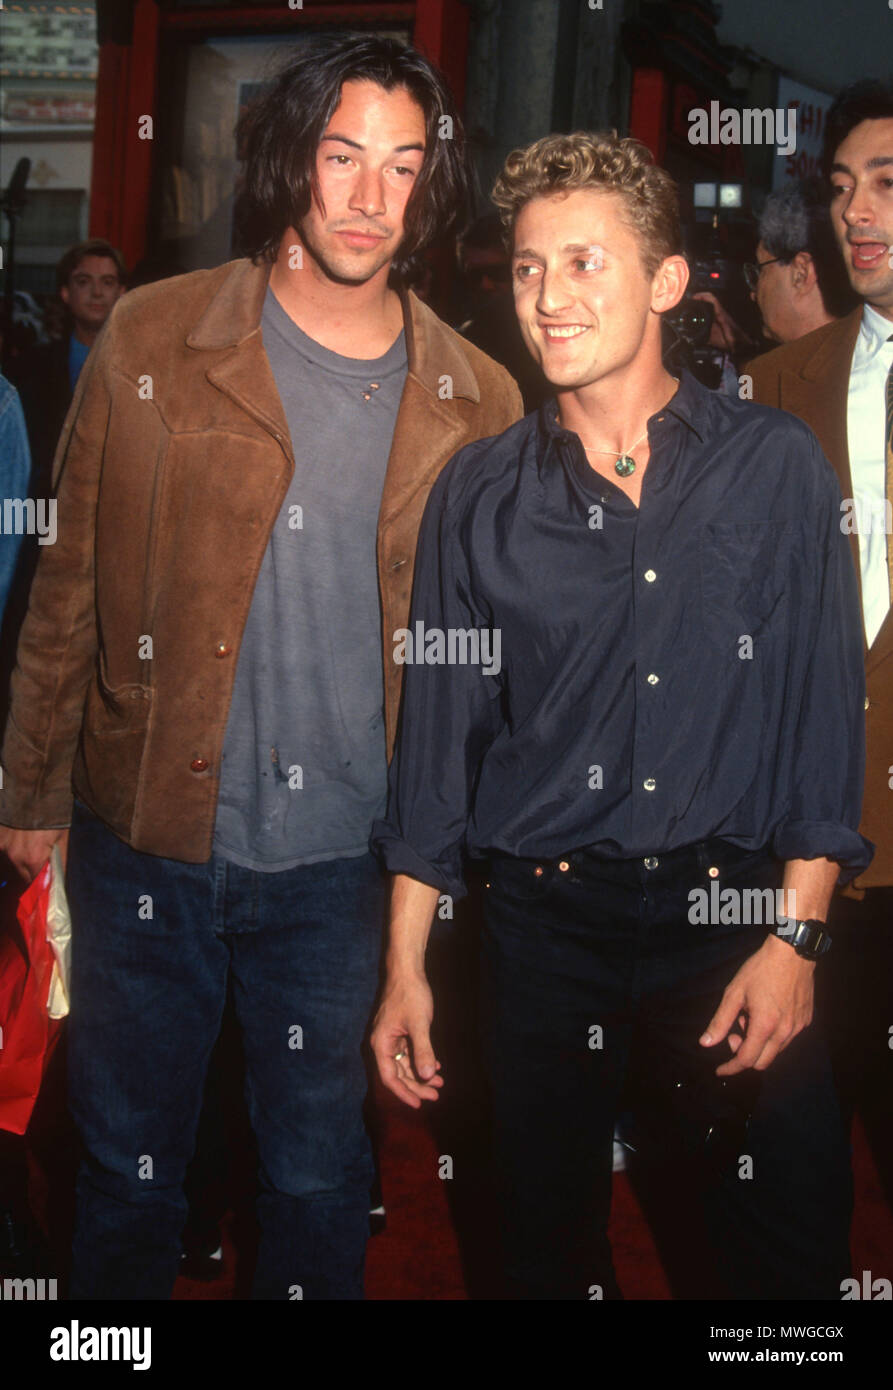 HOLLYWOOD, CA - JULY 11: (L-R) Actors Keanu Reeves and Alex Winter attend the 'Bill & Ted's Bogus Journey' Hollywood Premiere on July 11, 1991 at Mann's Chinese Theatre in Hollywood, California. Photo by Barry King/Alamy Stock Photo Stock Photo